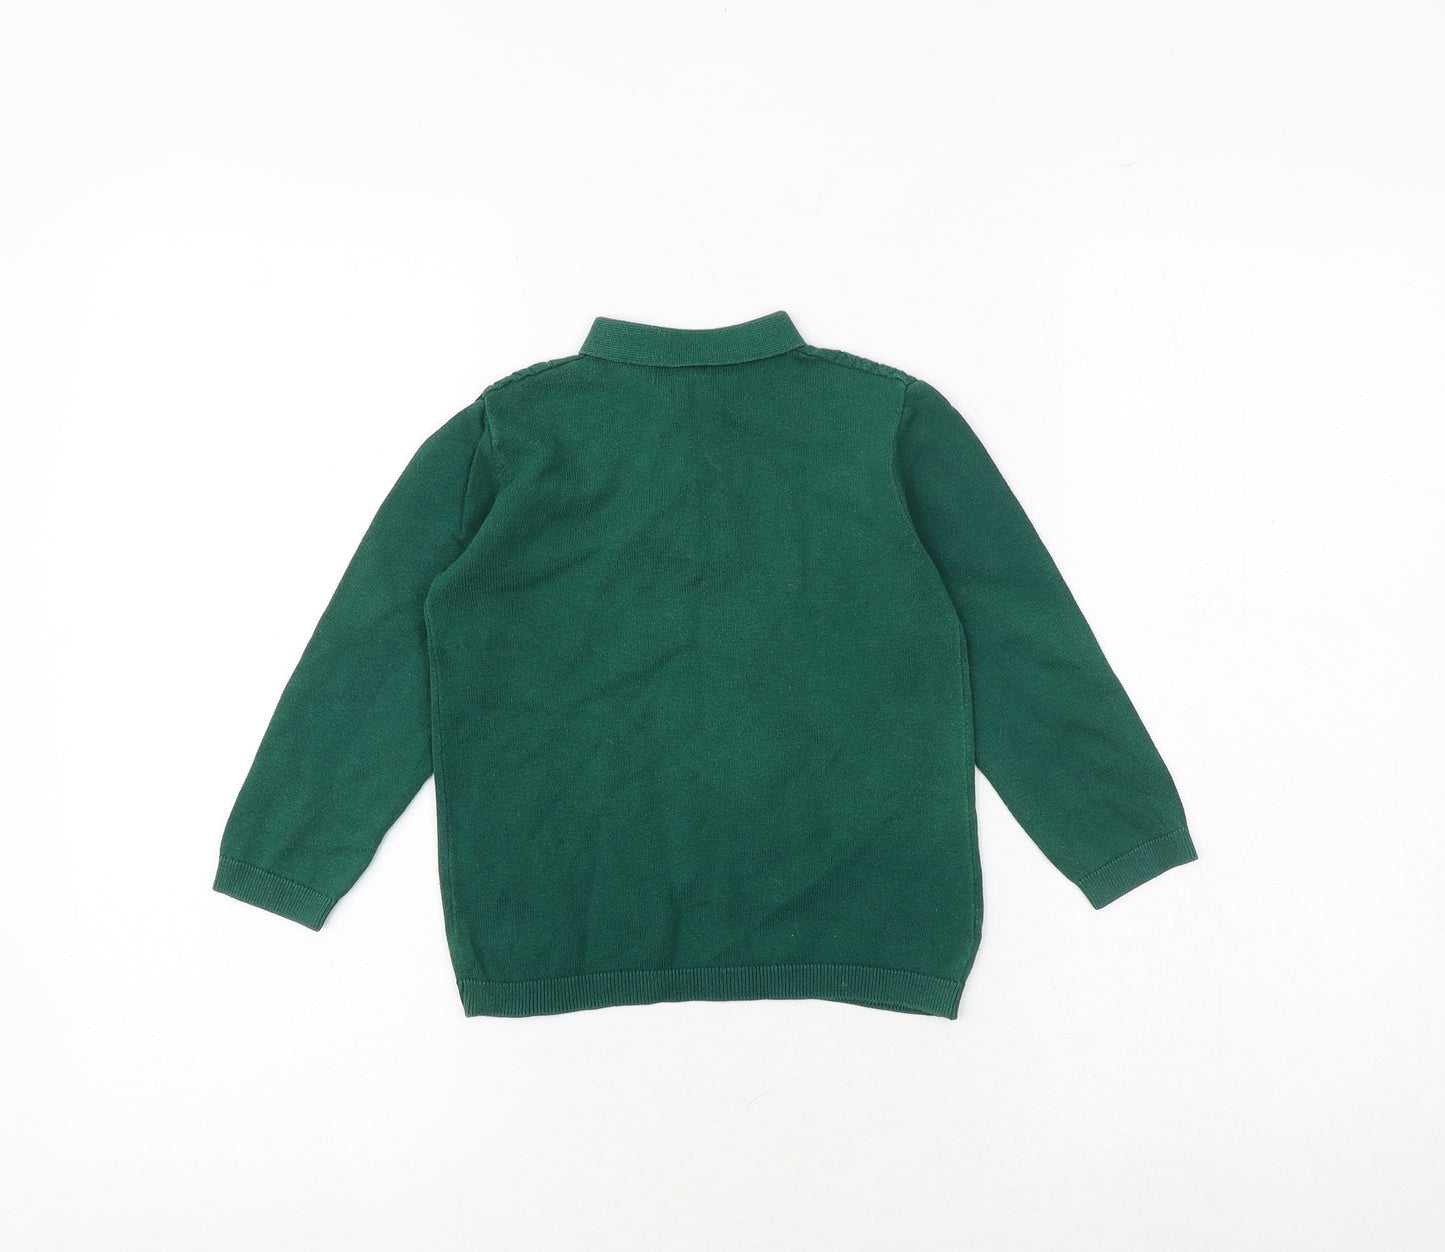 NEXT Boys Green Collared 100% Cotton Pullover Jumper Size 2-3 Years Button